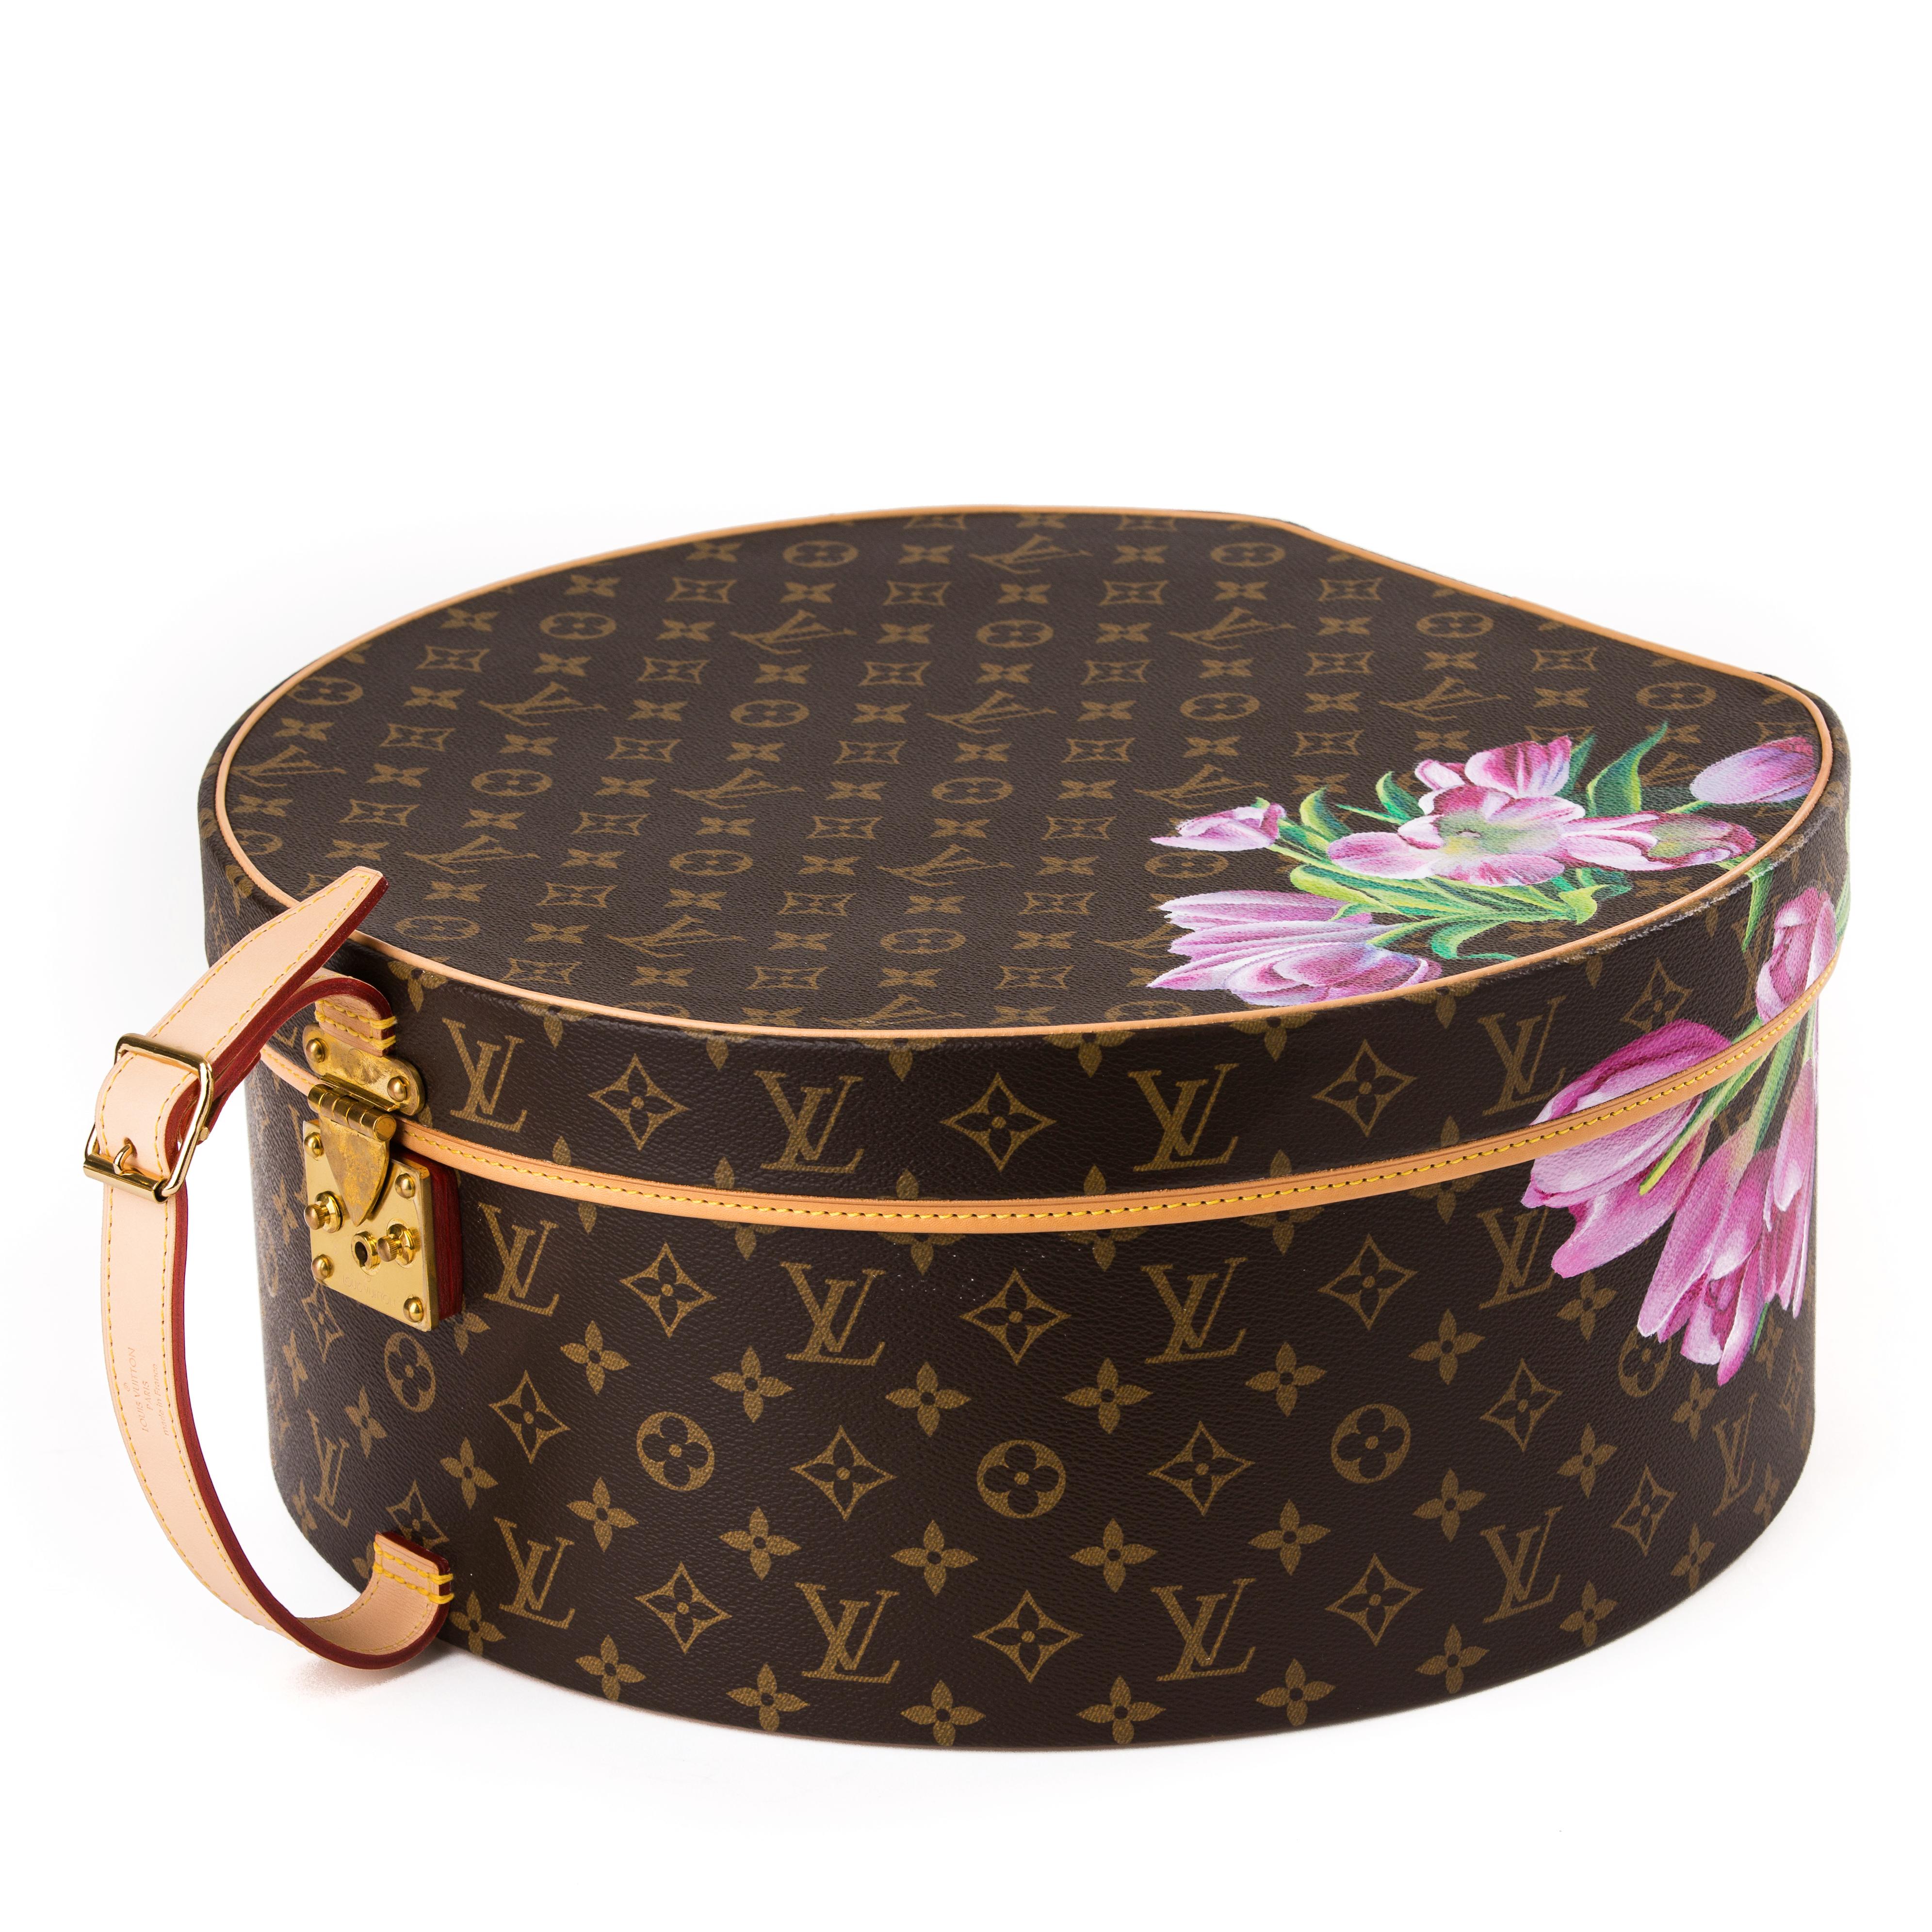 Louis Vuitton monogram hat box with floral design.
Hand painted in Beverley Hills exclusively for Palmer & Penn.
This beautiful item is a unique one off piece.